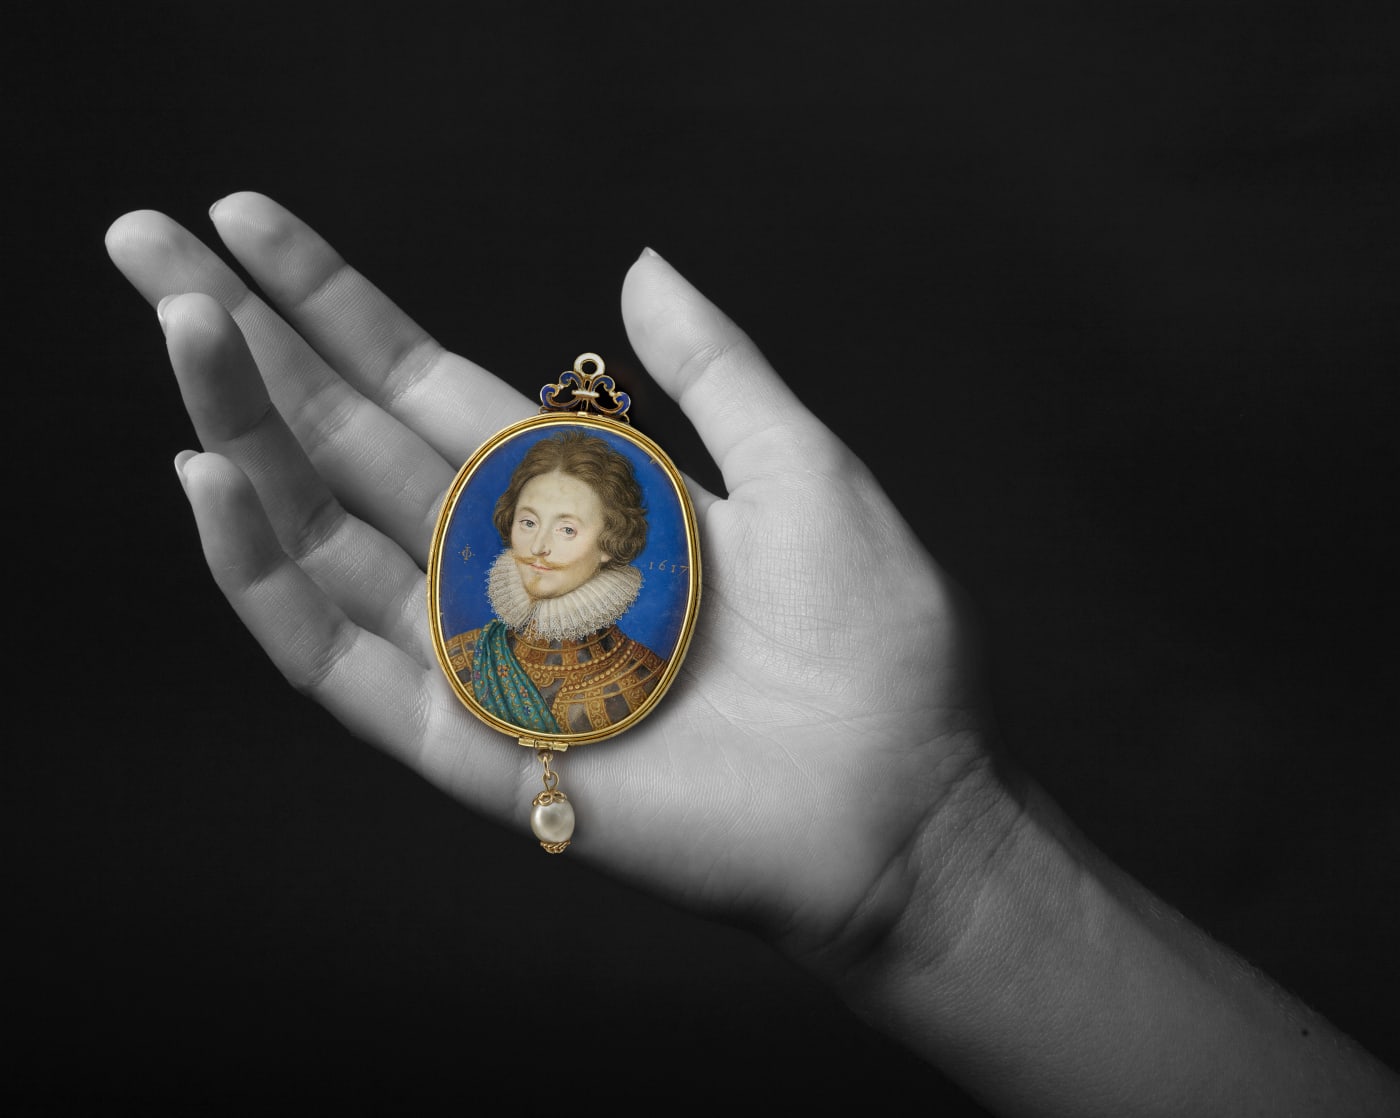 An exquisite portrait miniature of a gentleman by famous portrait miniaturist, Nicholas Hilliard. For other sold works by Hilliard, go to our artist pages.